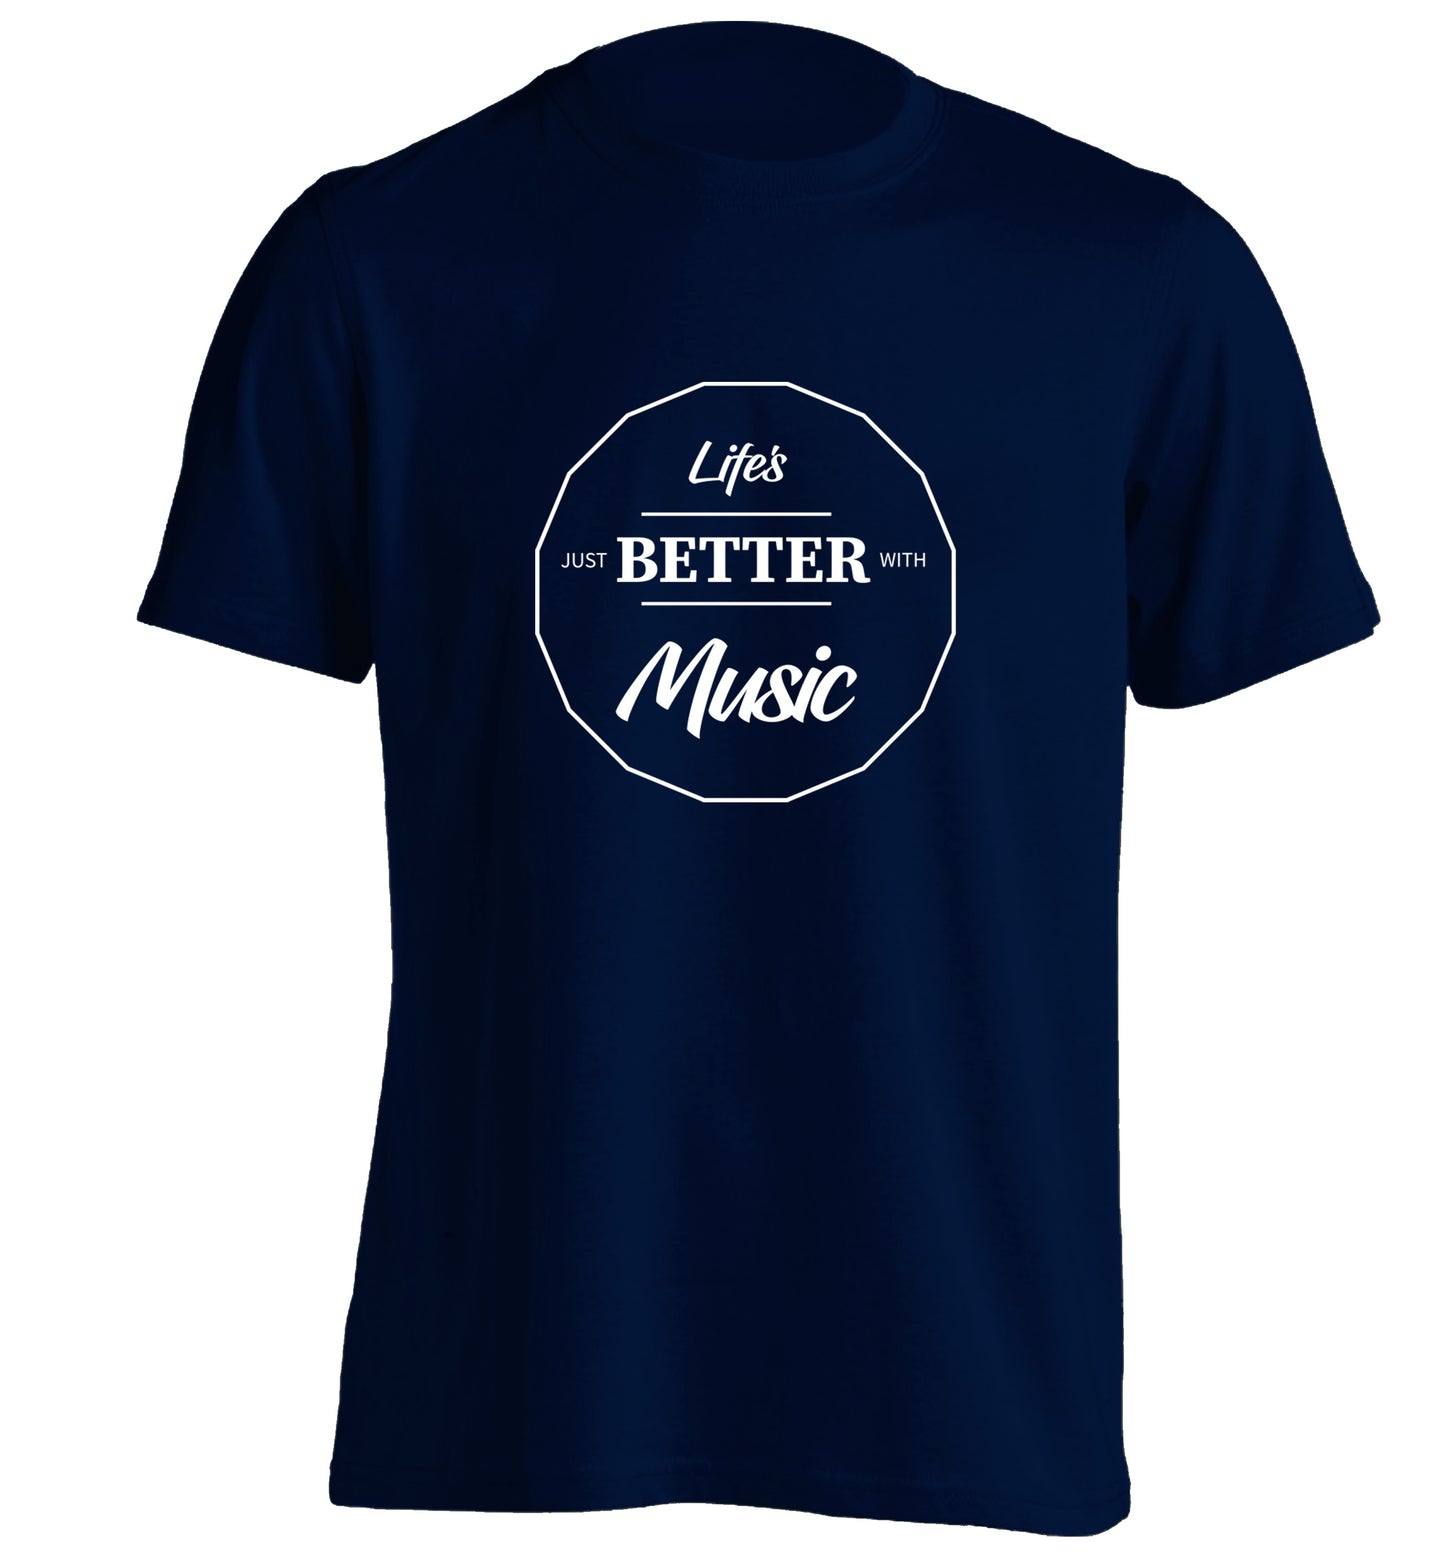 Life is Better With Music adults unisex navy Tshirt 2XL